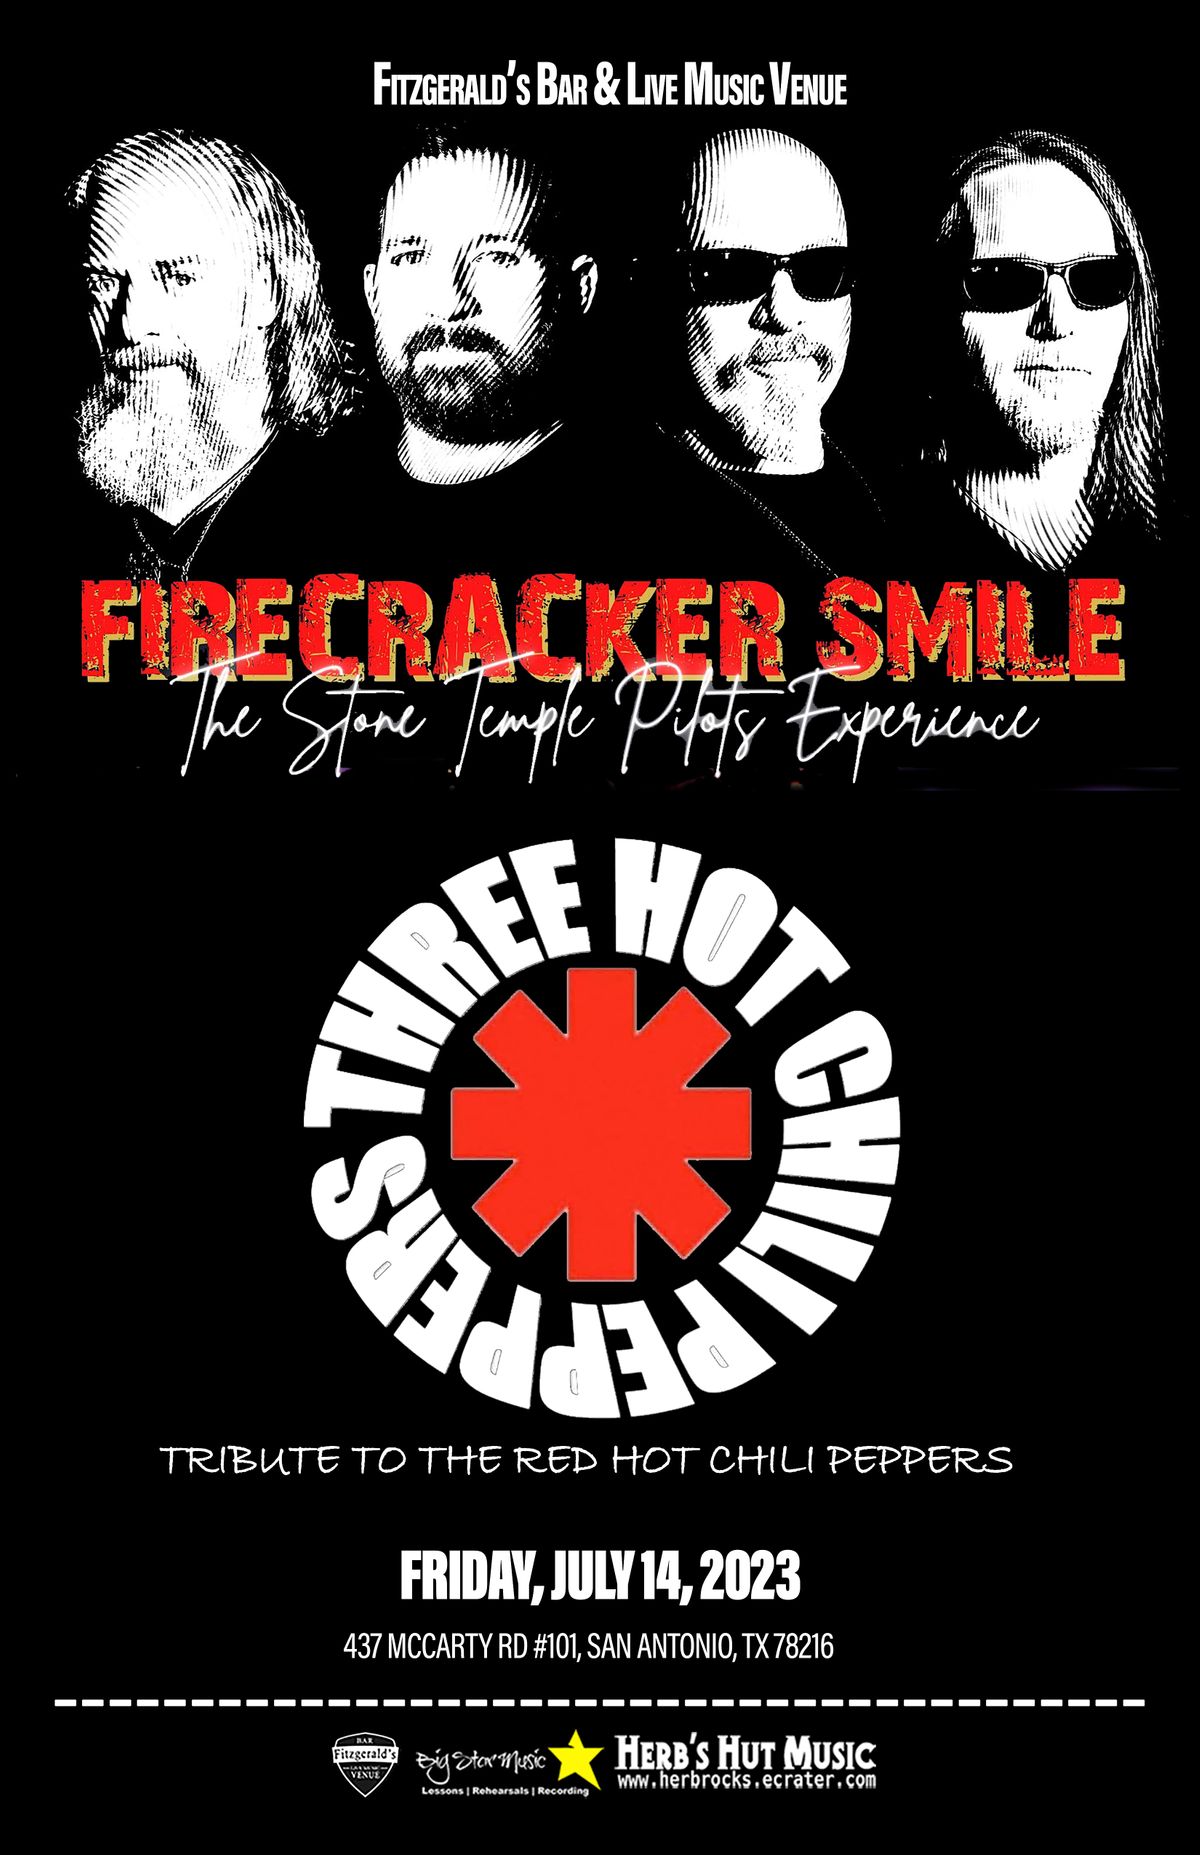 FIRECRACKER SMILE STP Tribute & Three Hot Chili Peppers RHCP Tribute